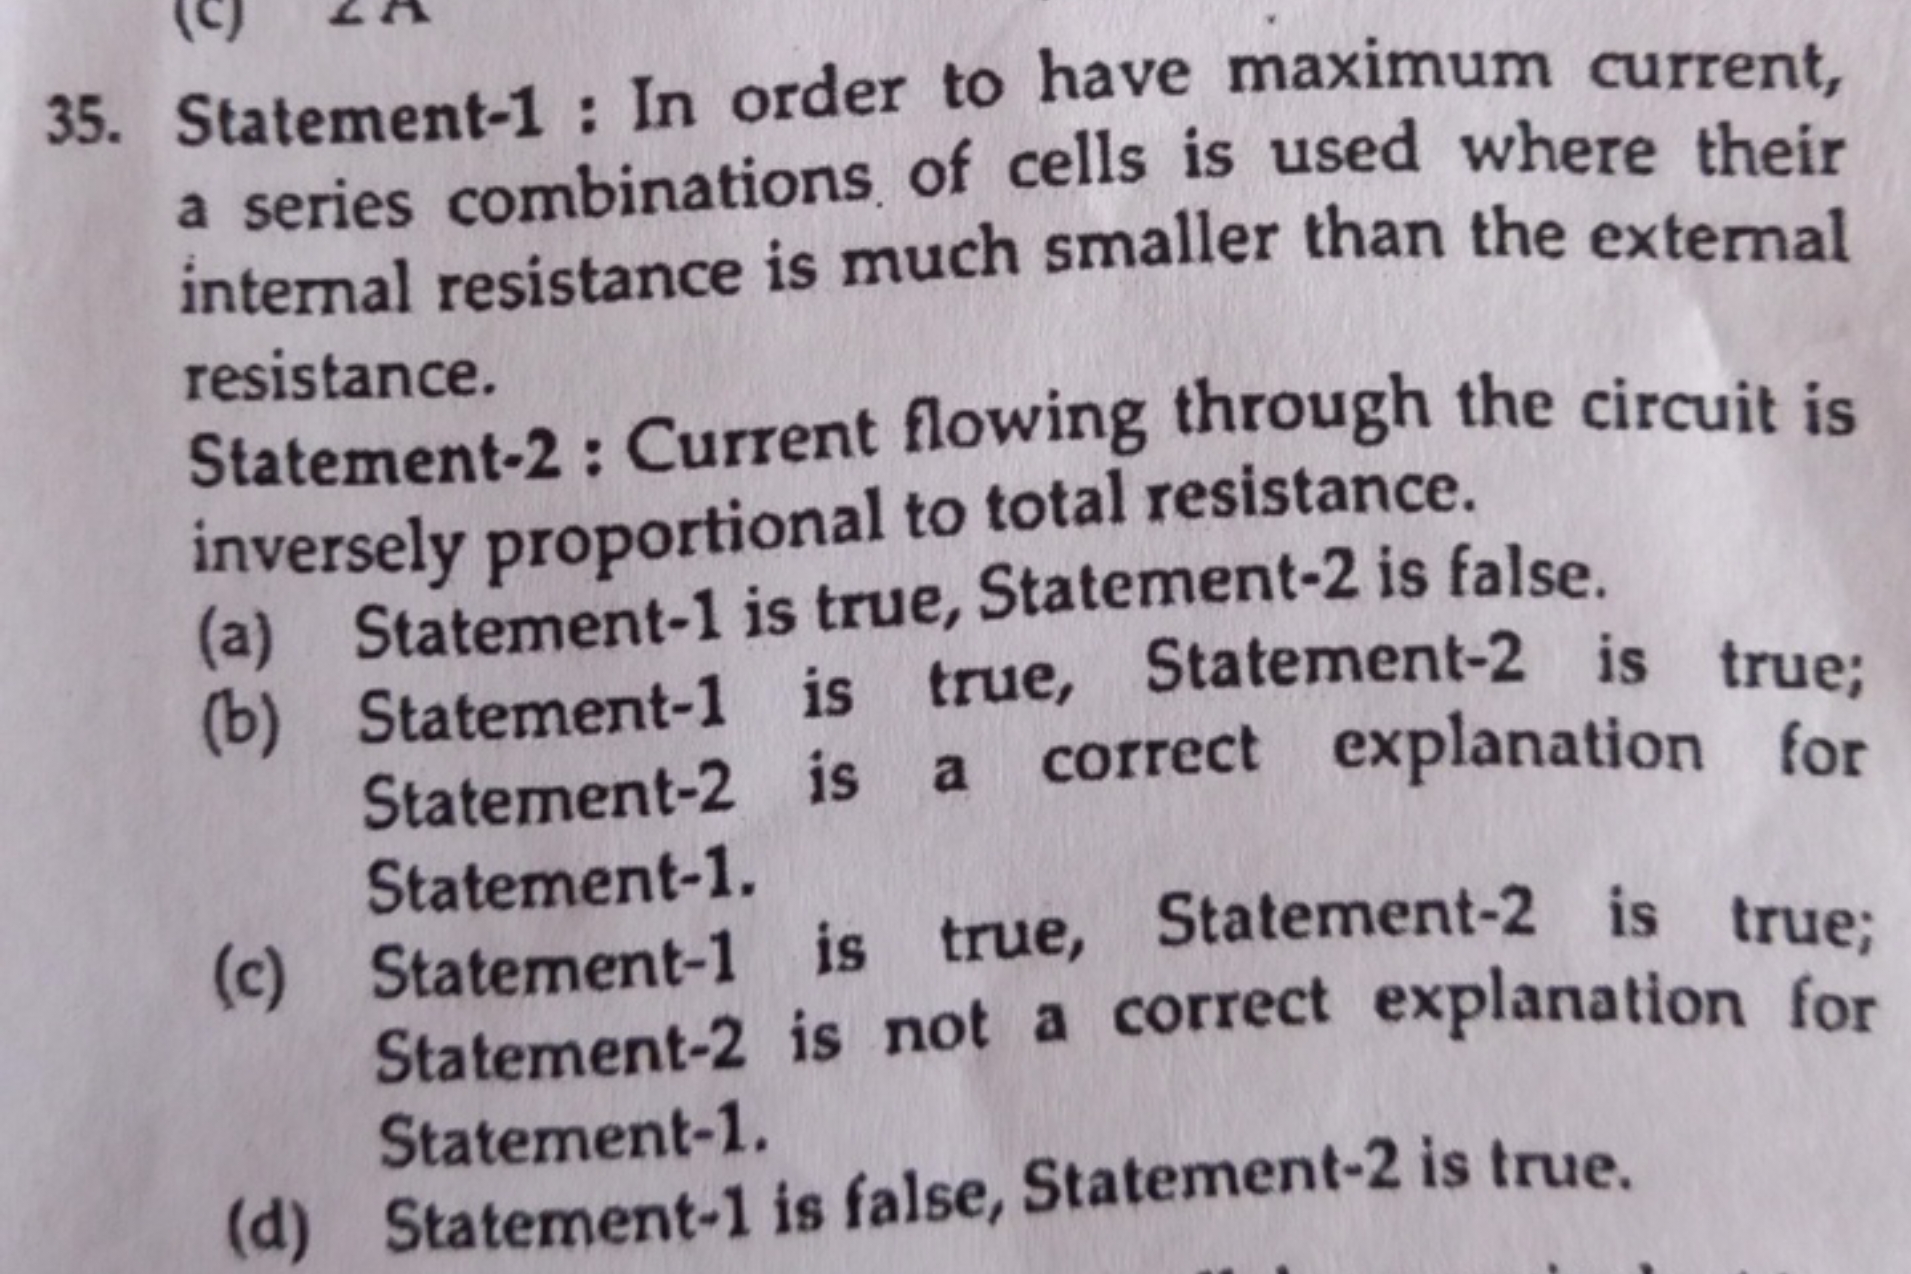 Statement-1 : In order to have maximum current, a series combinations 